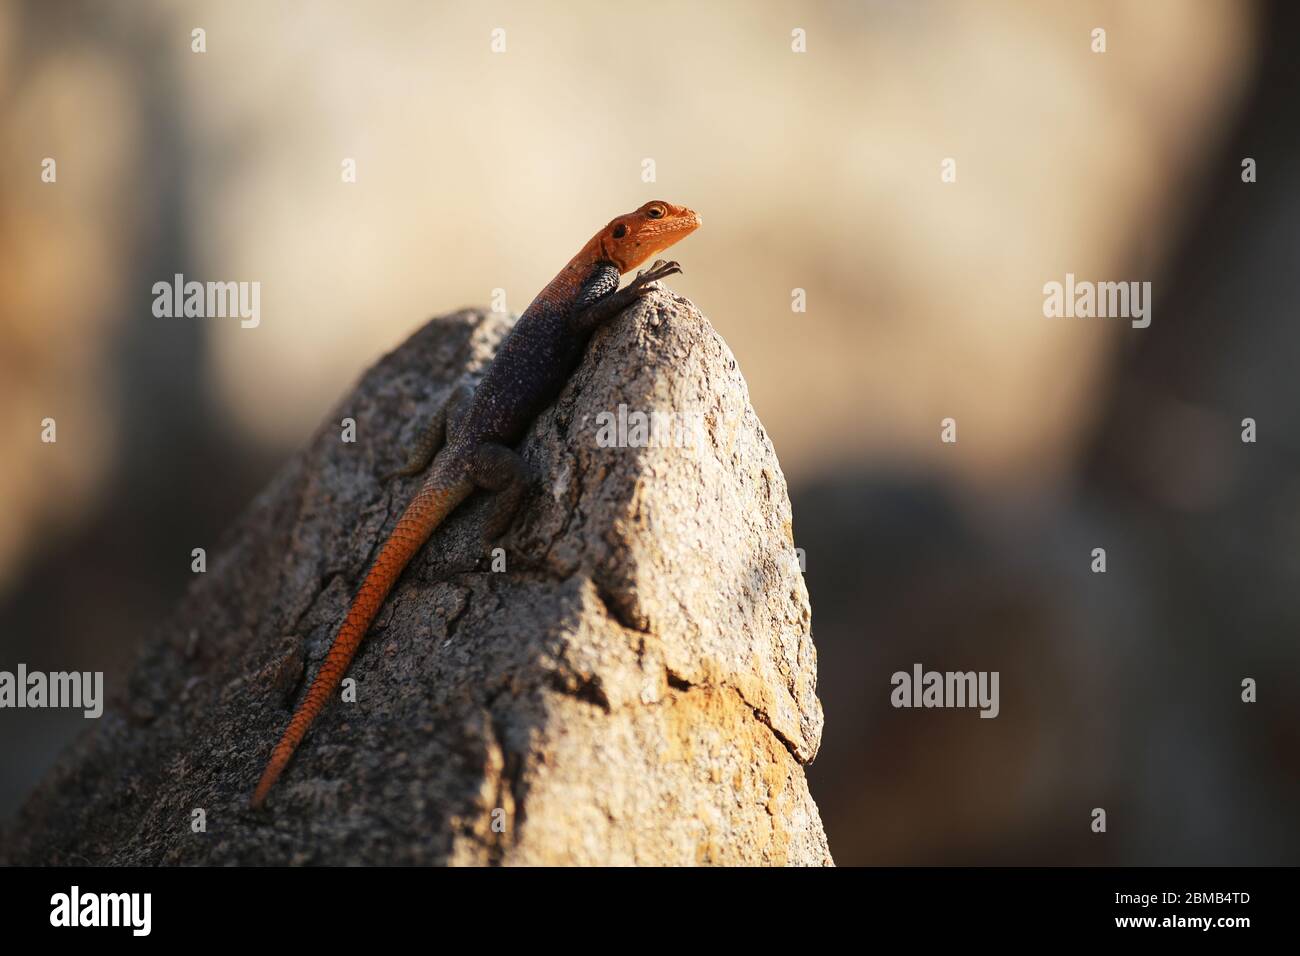 A male Namib rock agama (Agama planiceps) in the sun. Northern Namibia. Stock Photo